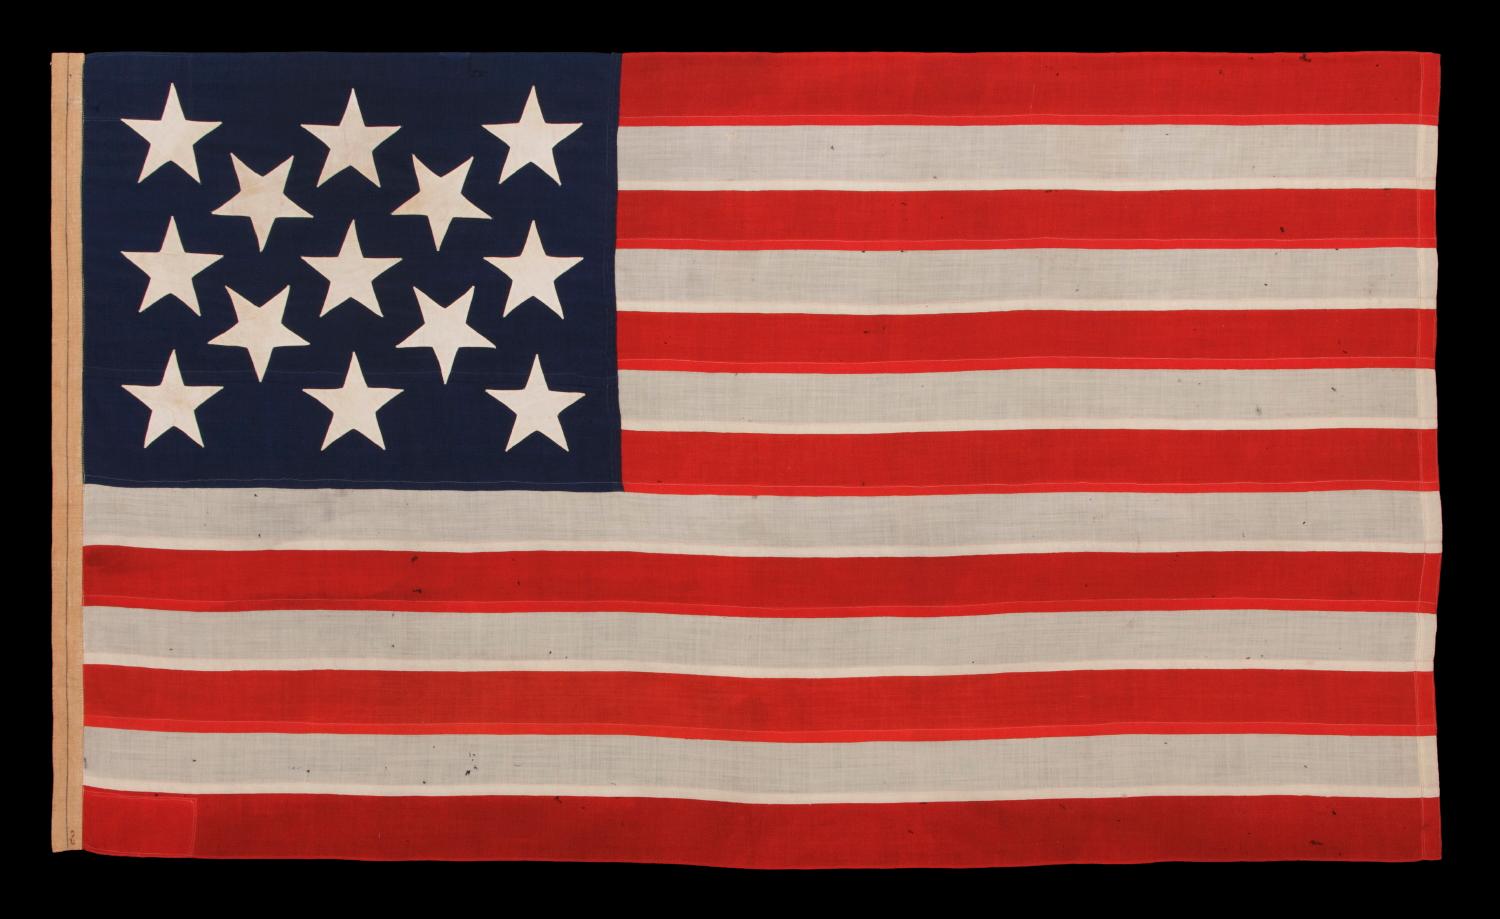 13 STAR ANTIQUE AMERICAN FLAG, A U.S. NAVY SMALL BOAT ENSIGN WITH ENORMOUS HAND-SEWN STARS, IN A REMARKABLE STATE OF PRESERVATION, CIRCA 1890-1899:

Despite the fact that America hasn't been comprised of 13 states since 1791, 13 star flags have been